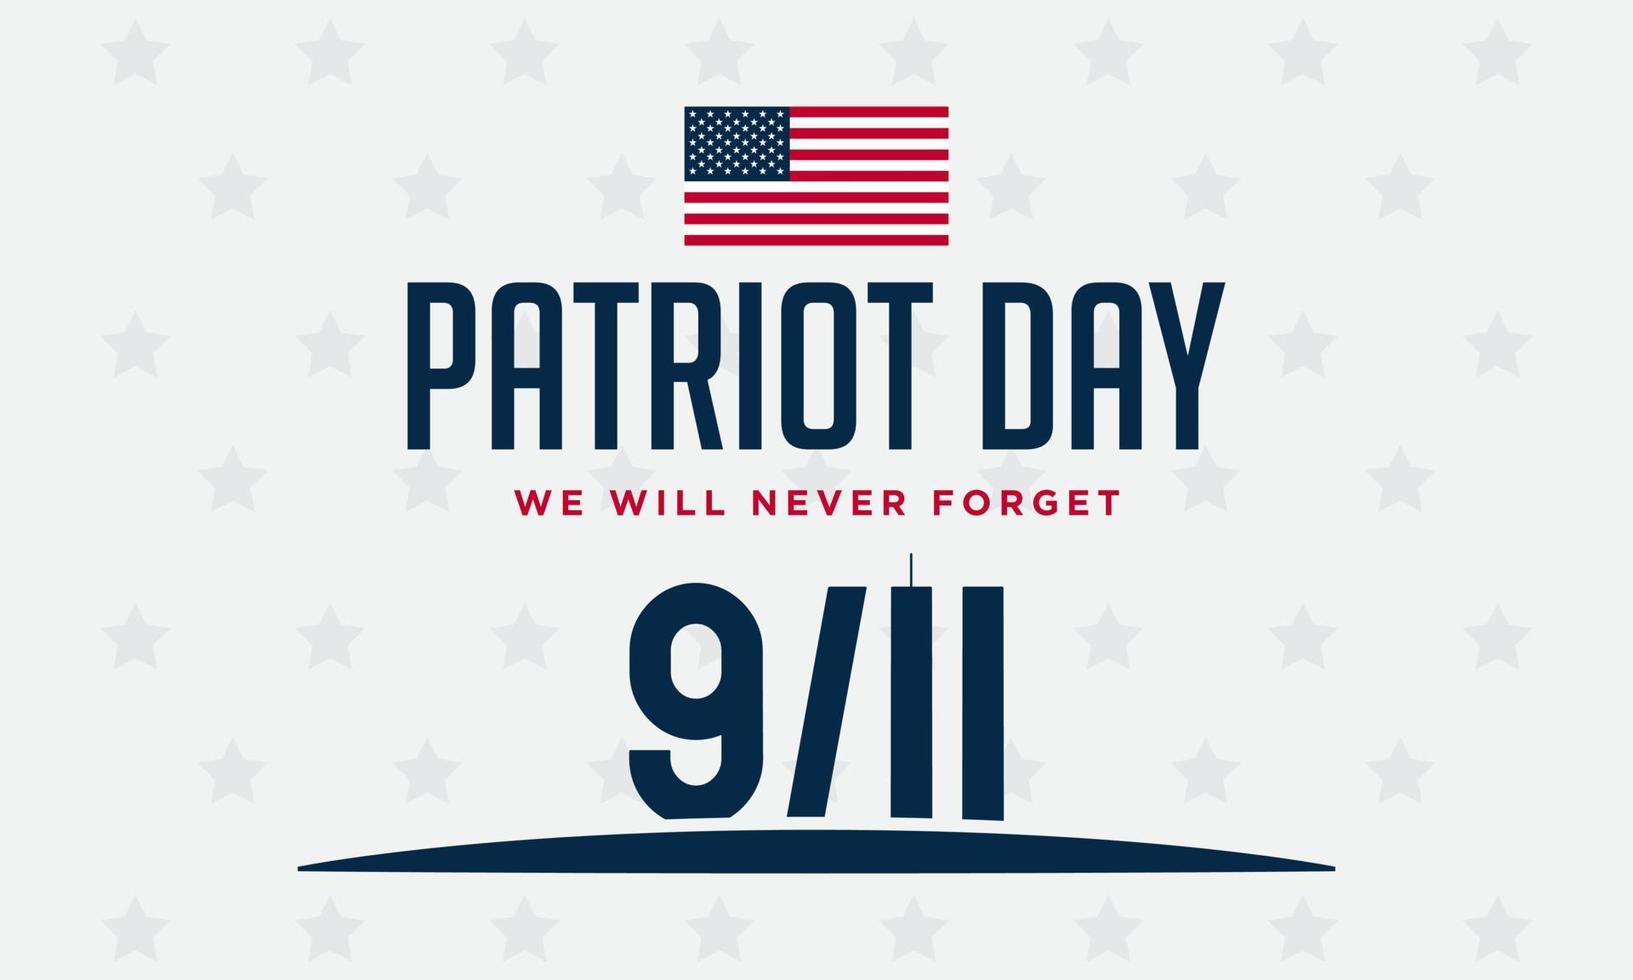 Vector banner design template with American flag and text on dark blue background for Patriot Day.